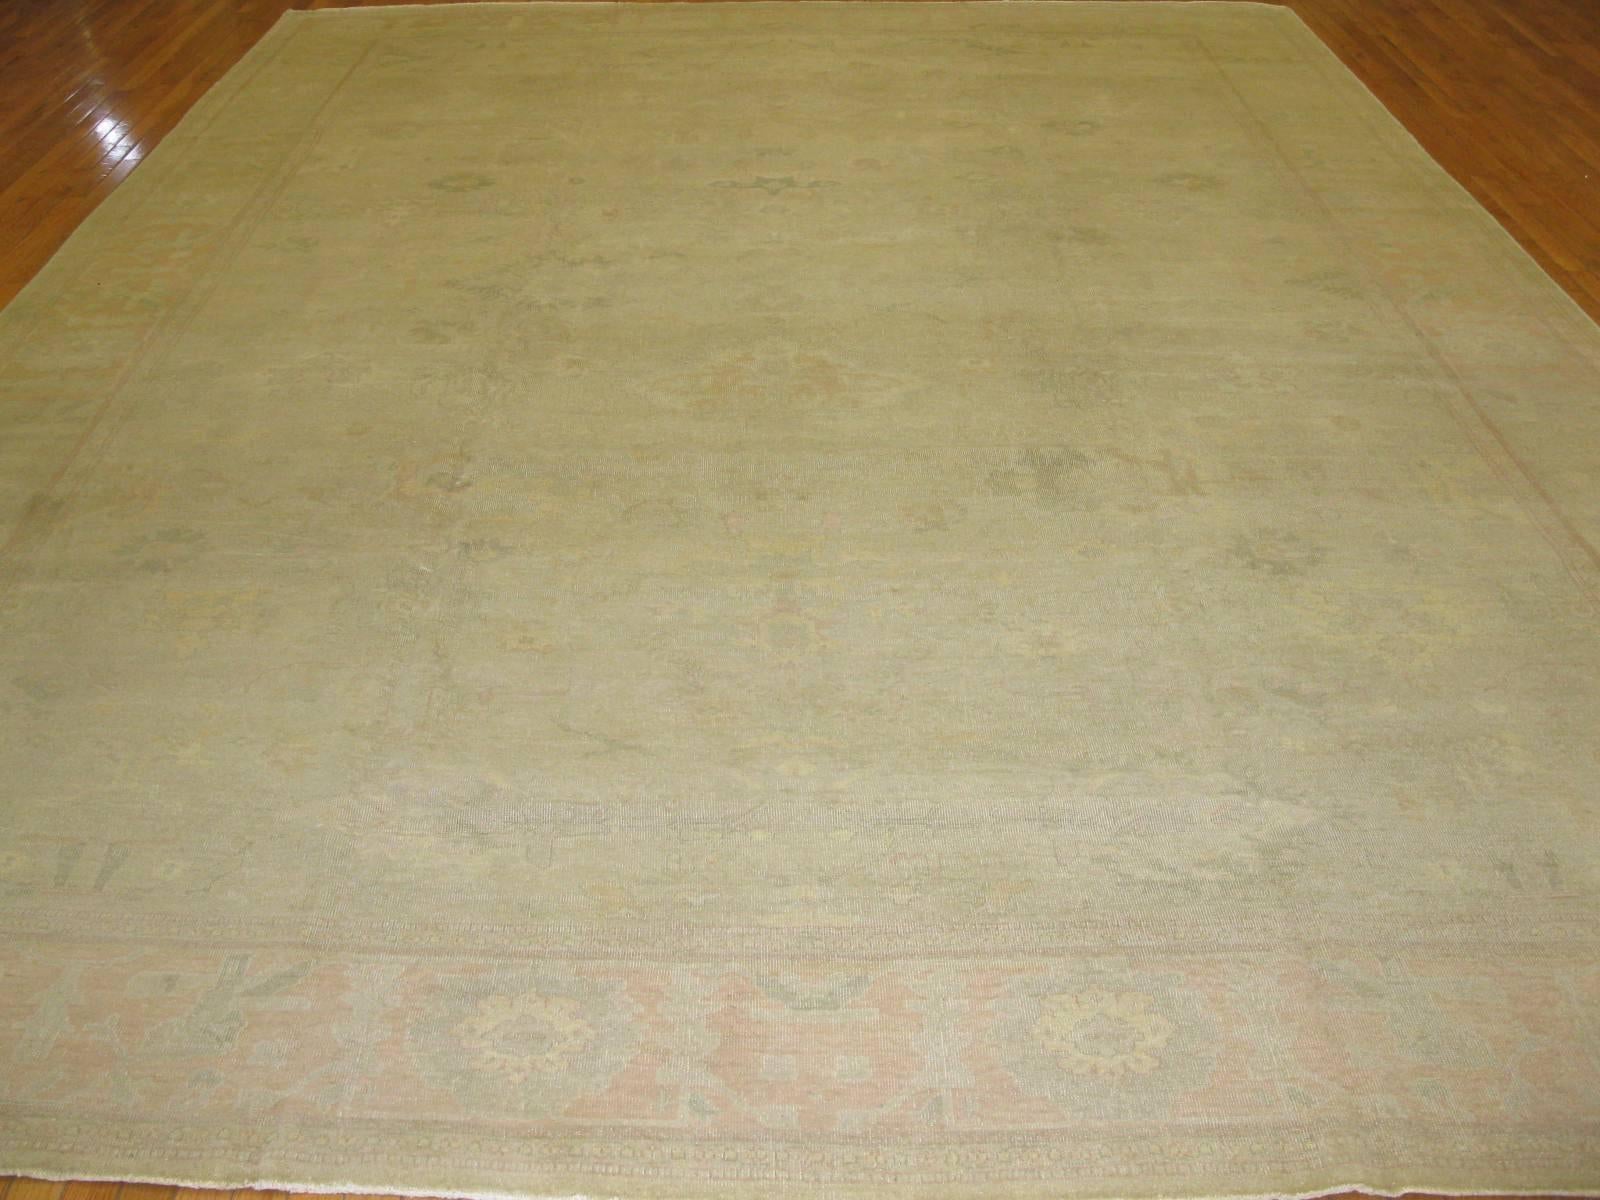 This is a beautiful antique washed hand-knotted rug made in Egypt with an all-over pattern Oushak design. The rug has a very fine weave with a great antique patina. It measures 10'9'' x 14'9''.